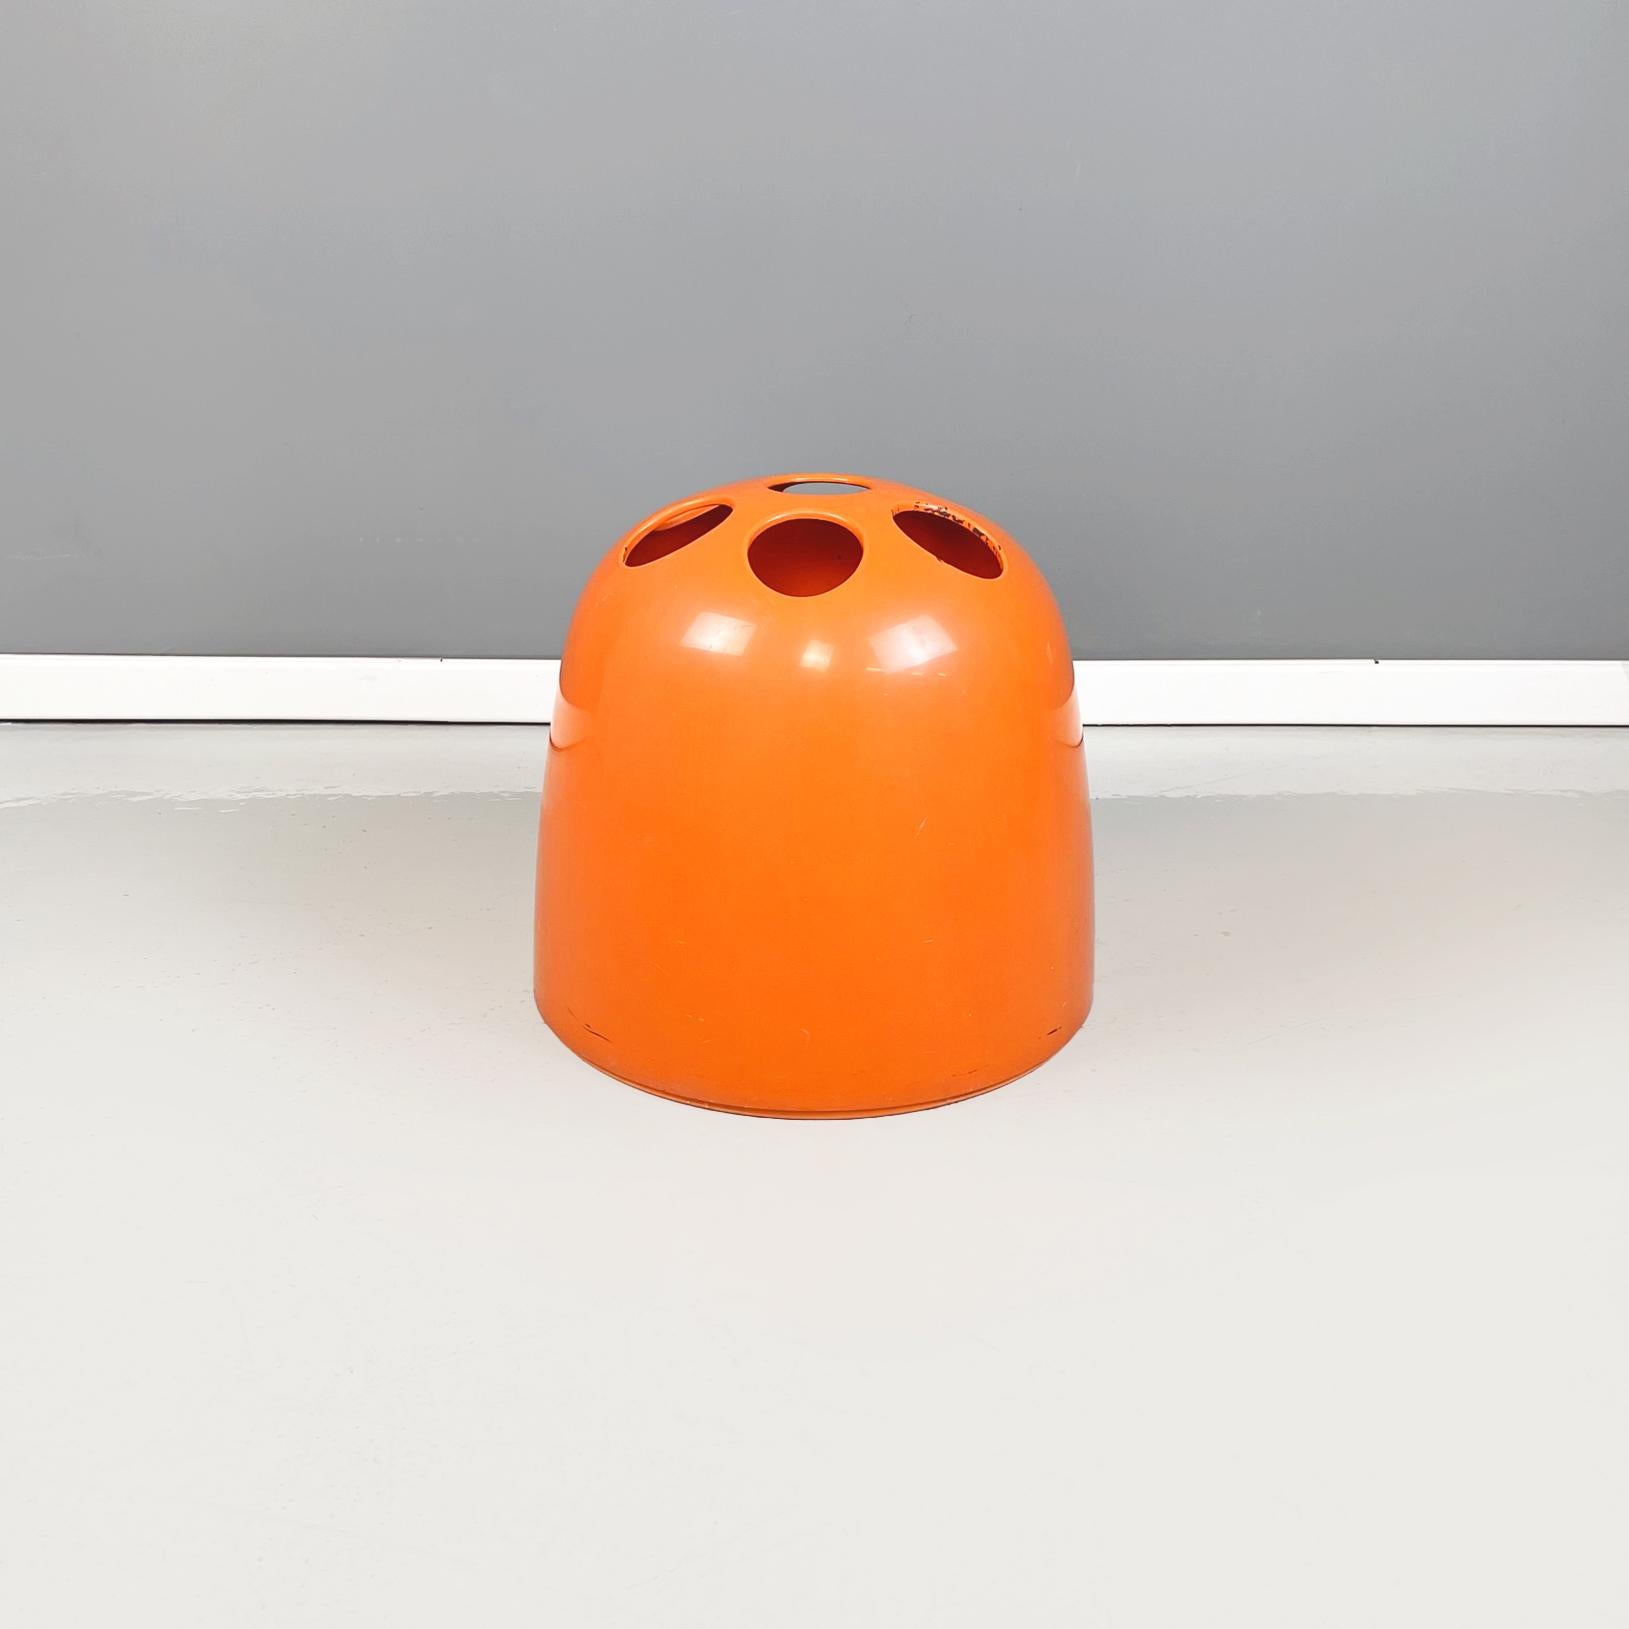 Italian space age orange plastic Umbrella stand Dedalo by Emma Gismondi Schweinberger for Artemide, 1970s
Iconic Umbrella stand mod. Dedalo with round base, entirely in orange painted plastic. The dome-shaped structure is provided in the upper part